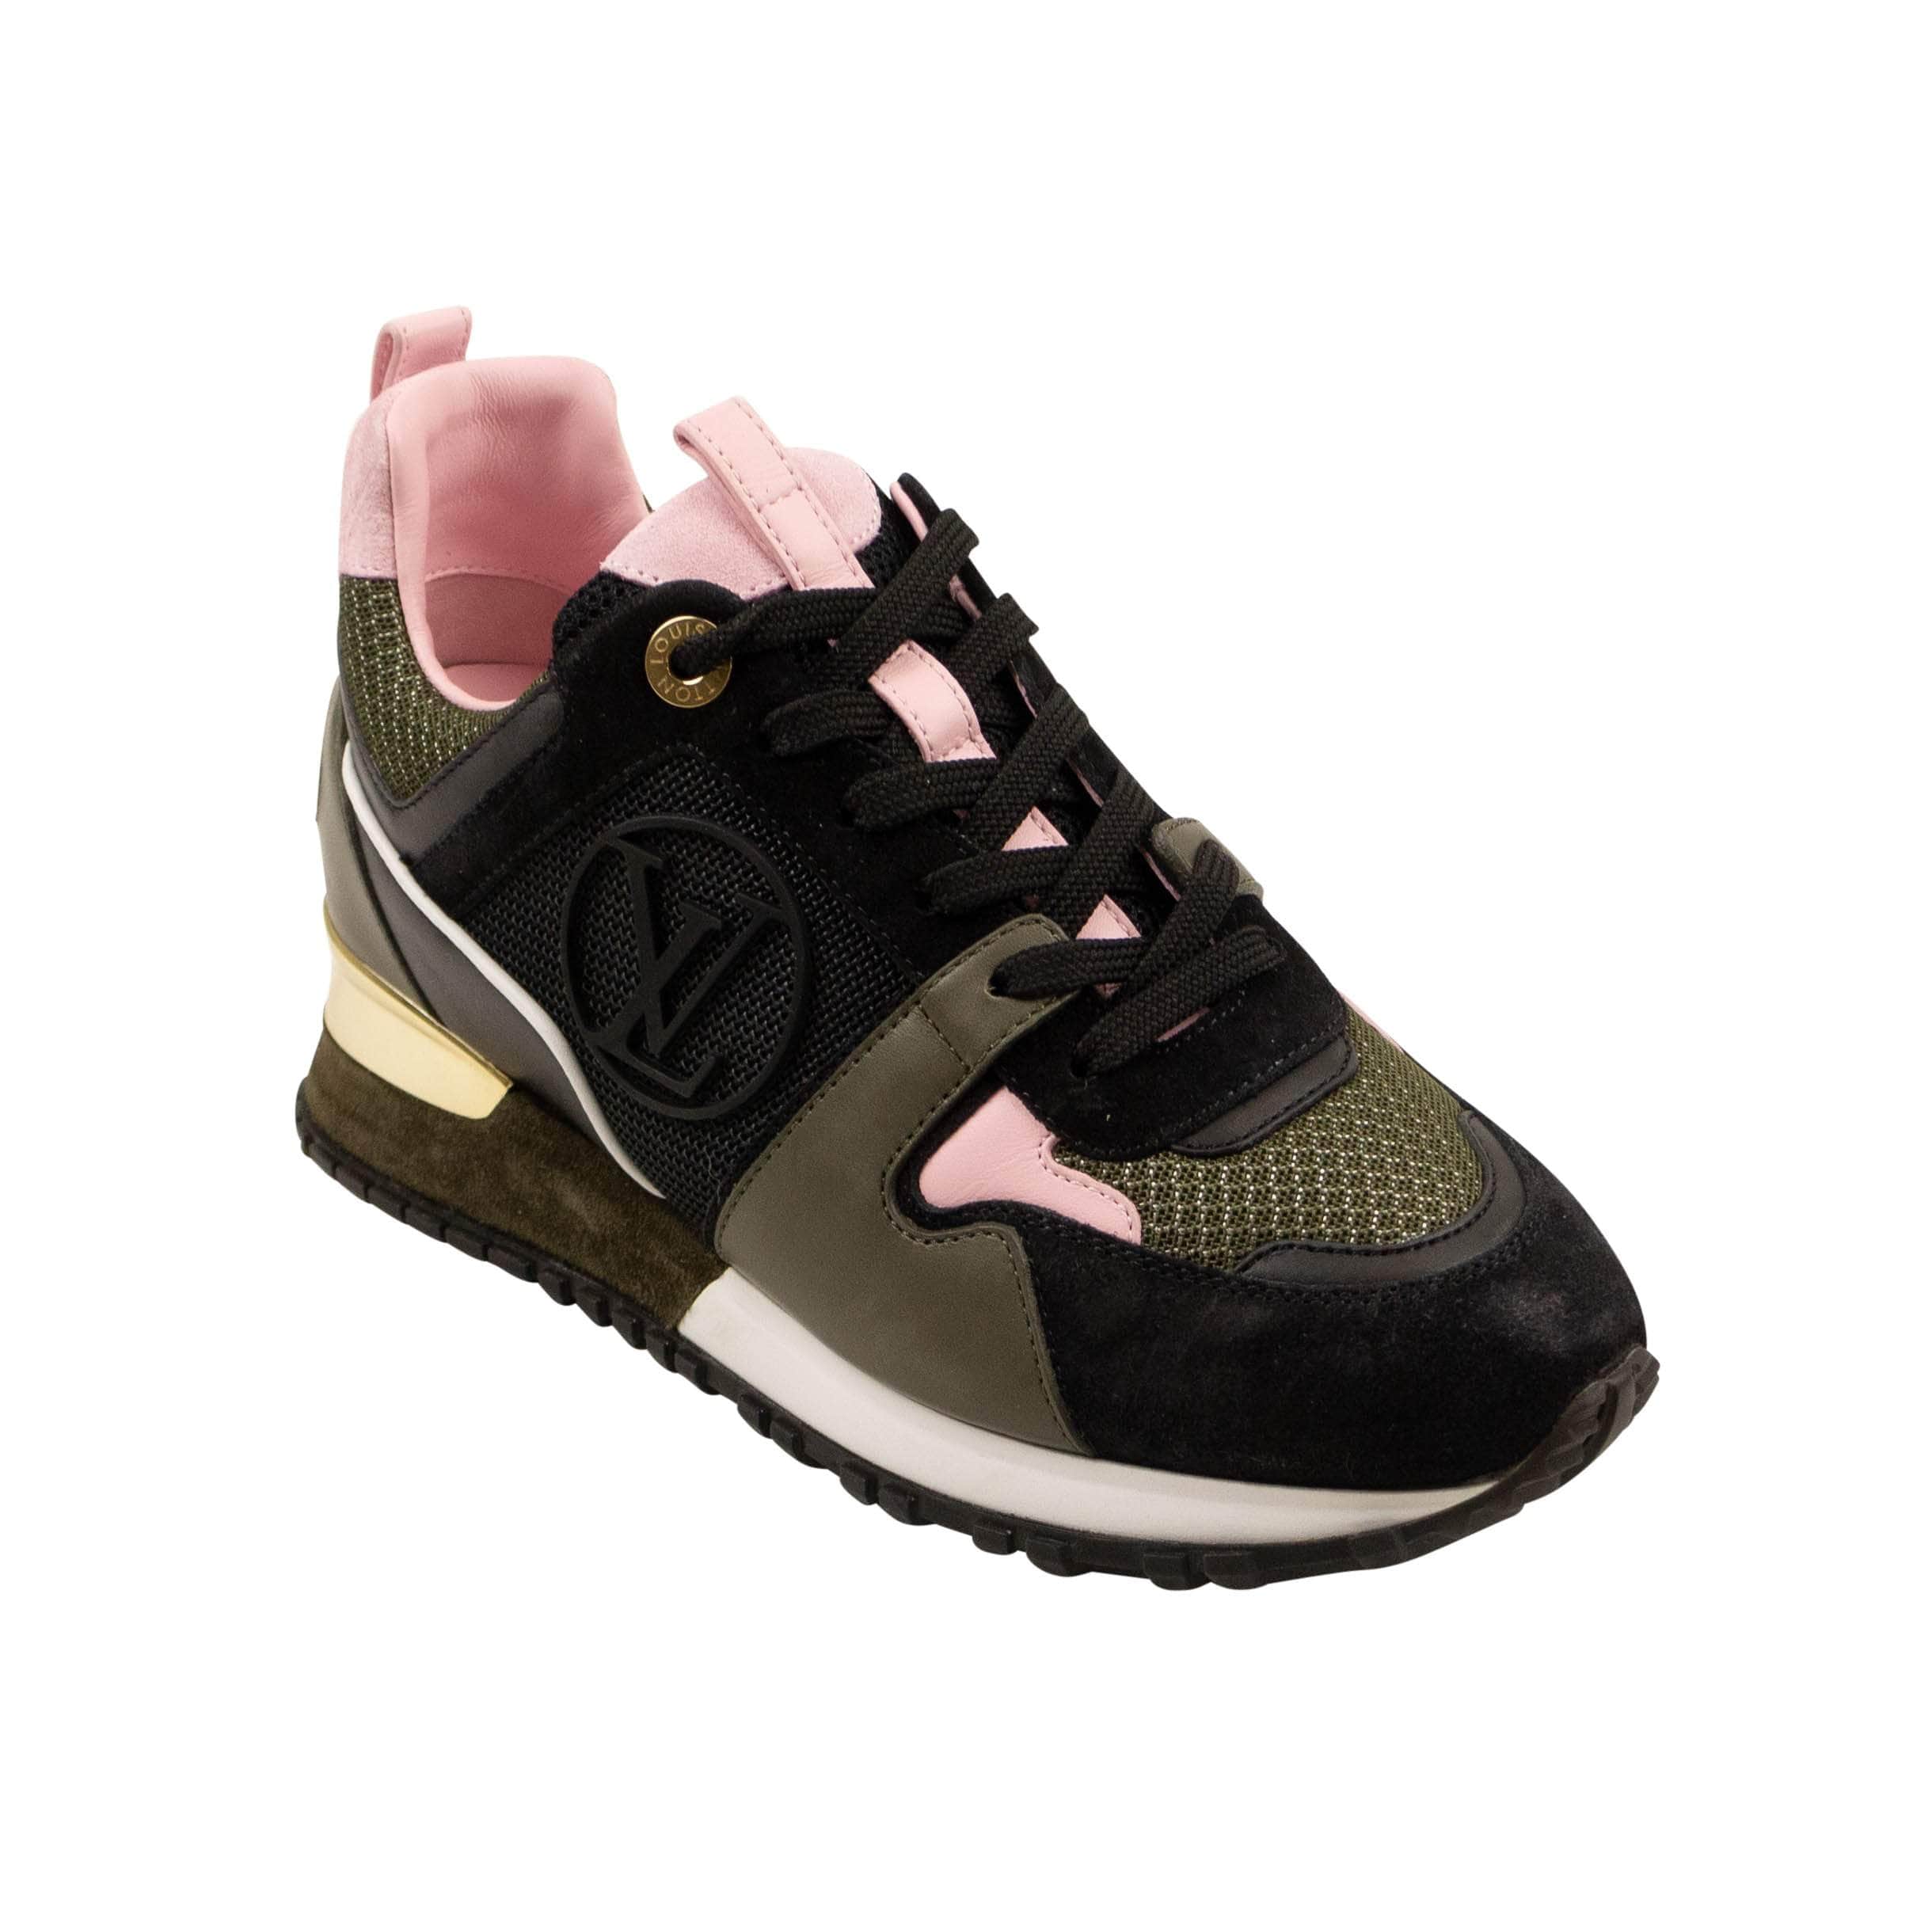 Louis Vuitton 500-750, channelenable-all, chicmi, couponcollection, gender-womens, main-shoes, size-4-us-34-eu, SPO, stadiumgoods 4 US / 34 EU / 1A94BZ Black, Green And Pink Run Away Sneakers 95-LVT-2071/34 95-LVT-2071/34